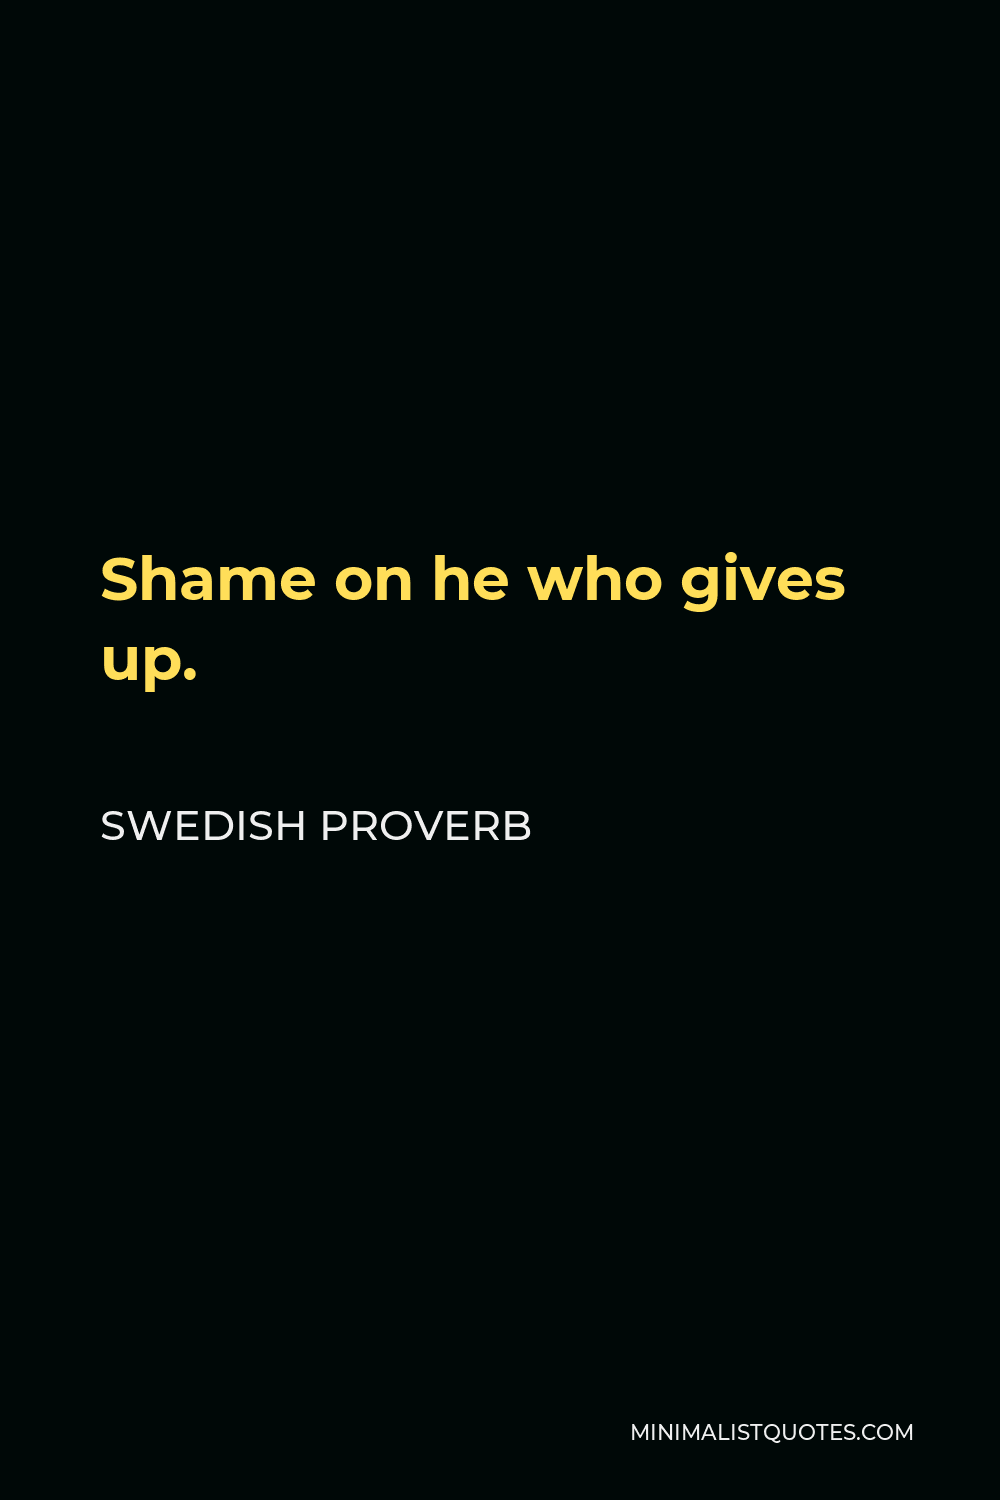 Swedish Proverb Quote - Shame on he who gives up.